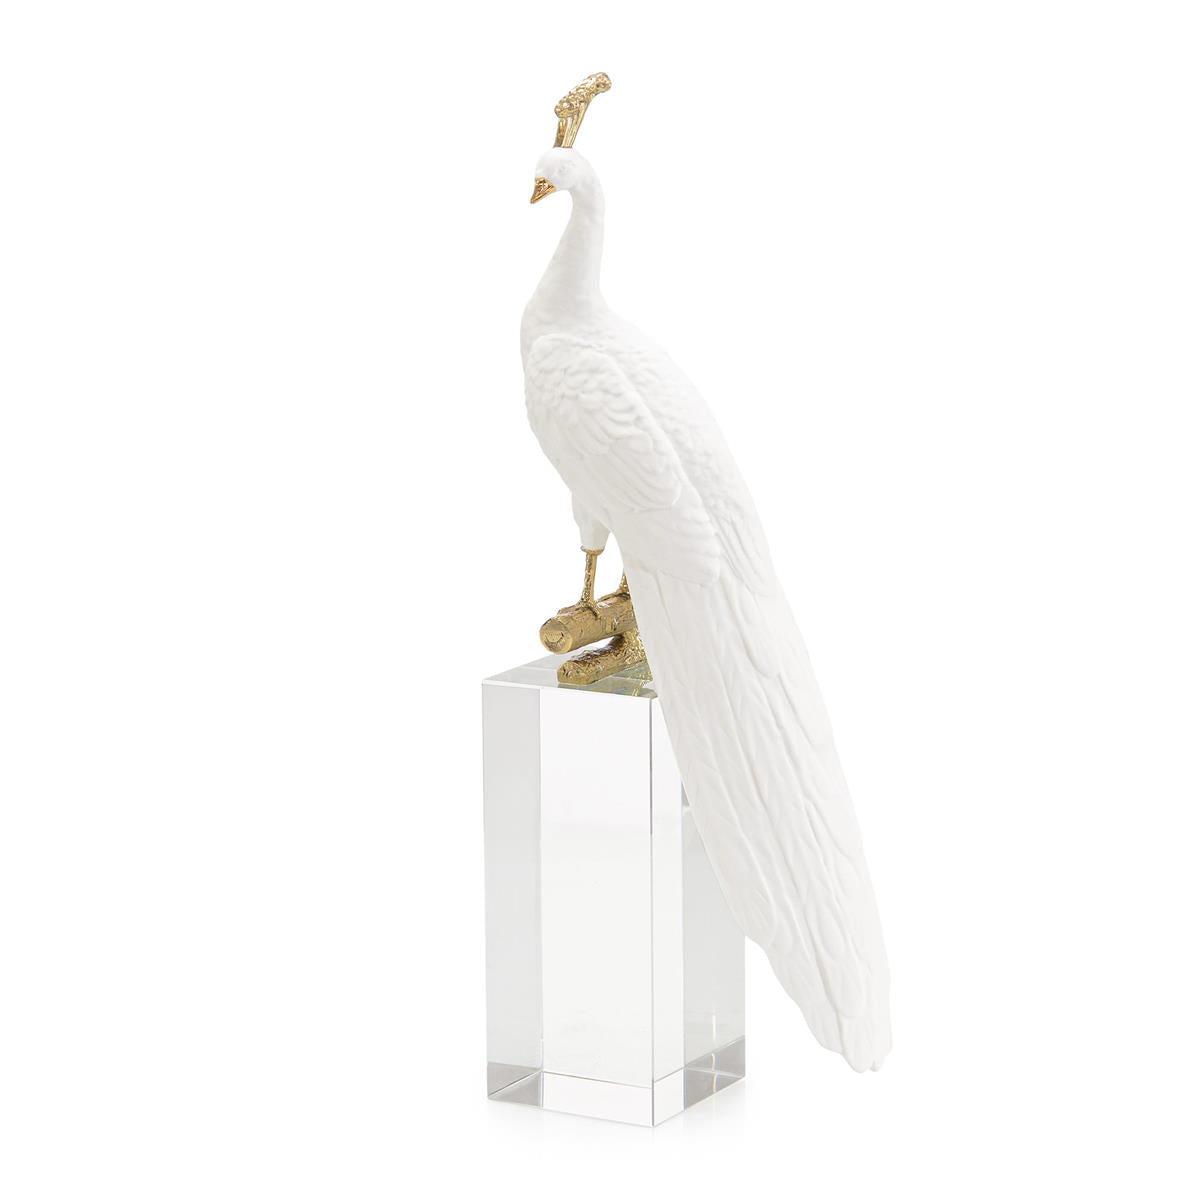 White Peacock Sculpture on Crystal Base-John Richard-Sculptures & Objects-Artistic Elements